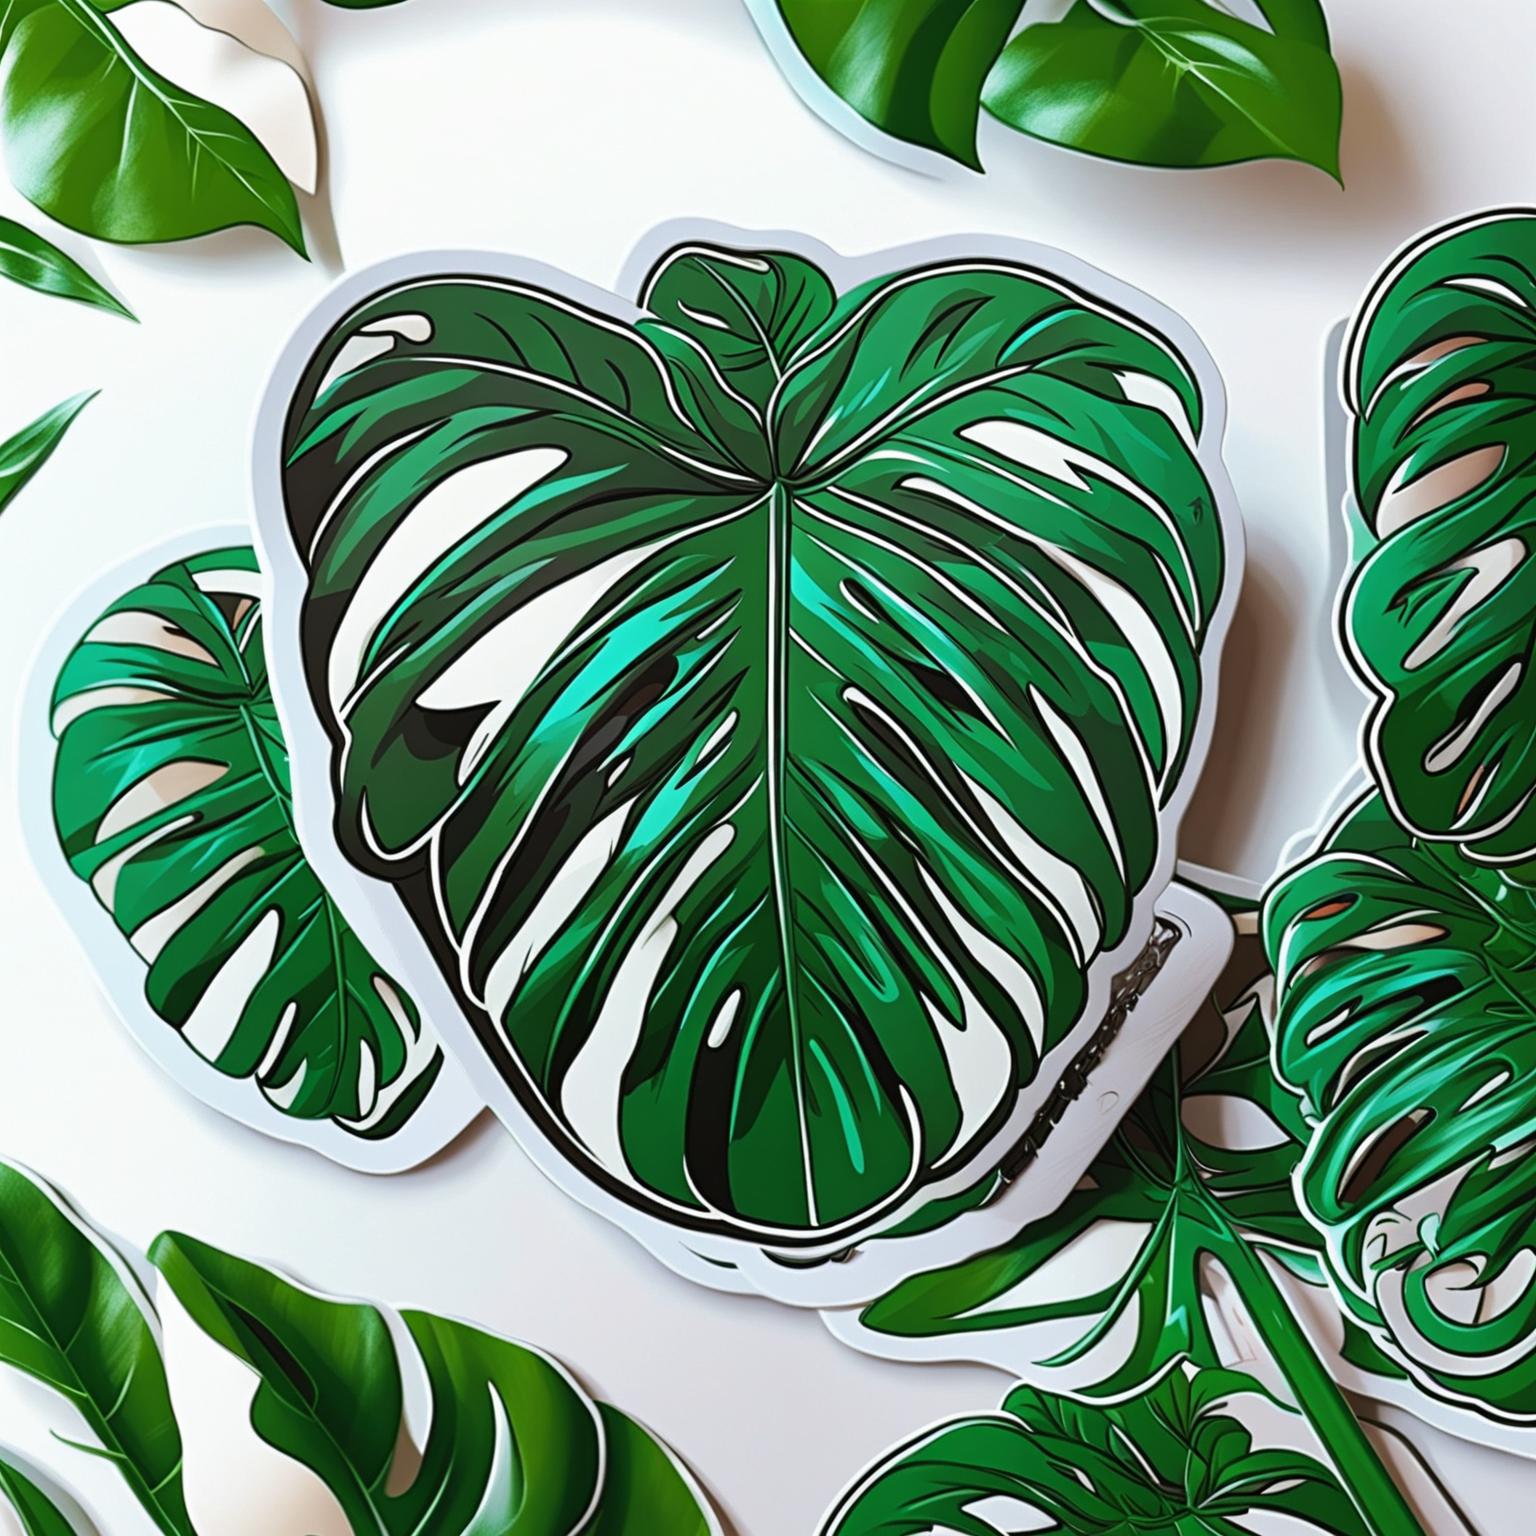 Create a cute Monstera plant sticker with large, split leaves and a cheerful expression